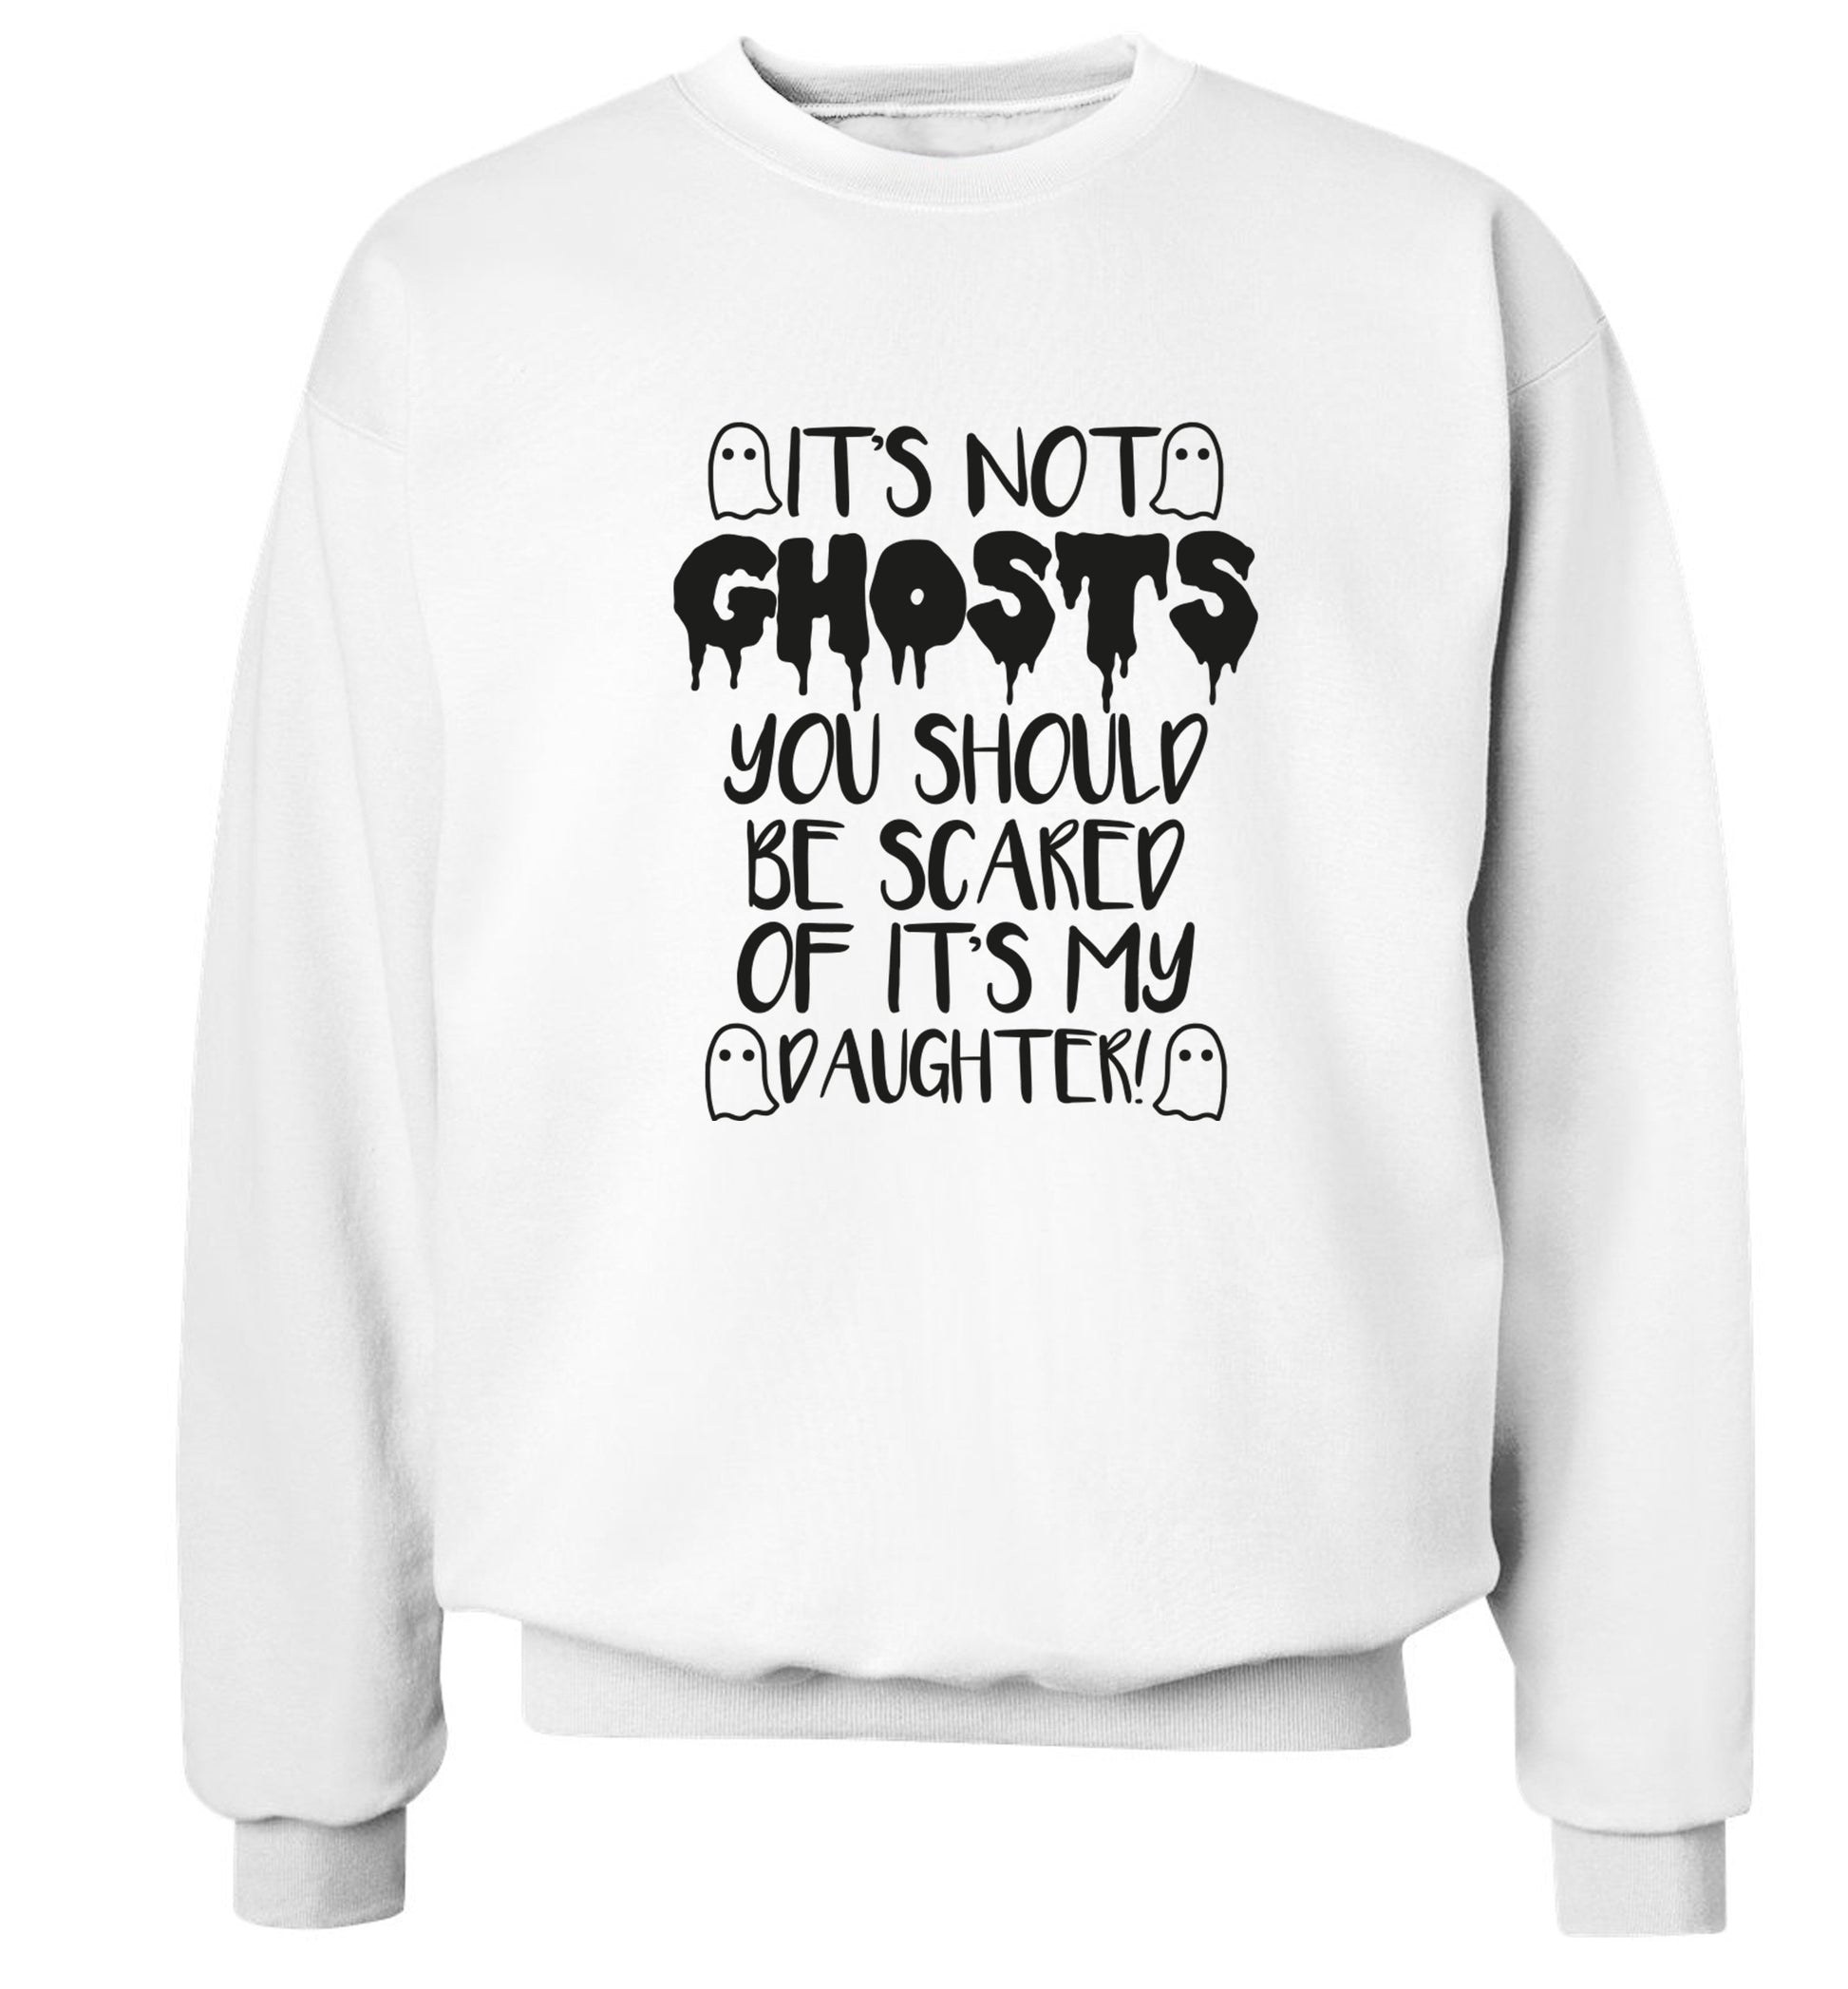 It's not ghosts you should be scared of it's my daughter! Adult's unisex white Sweater 2XL